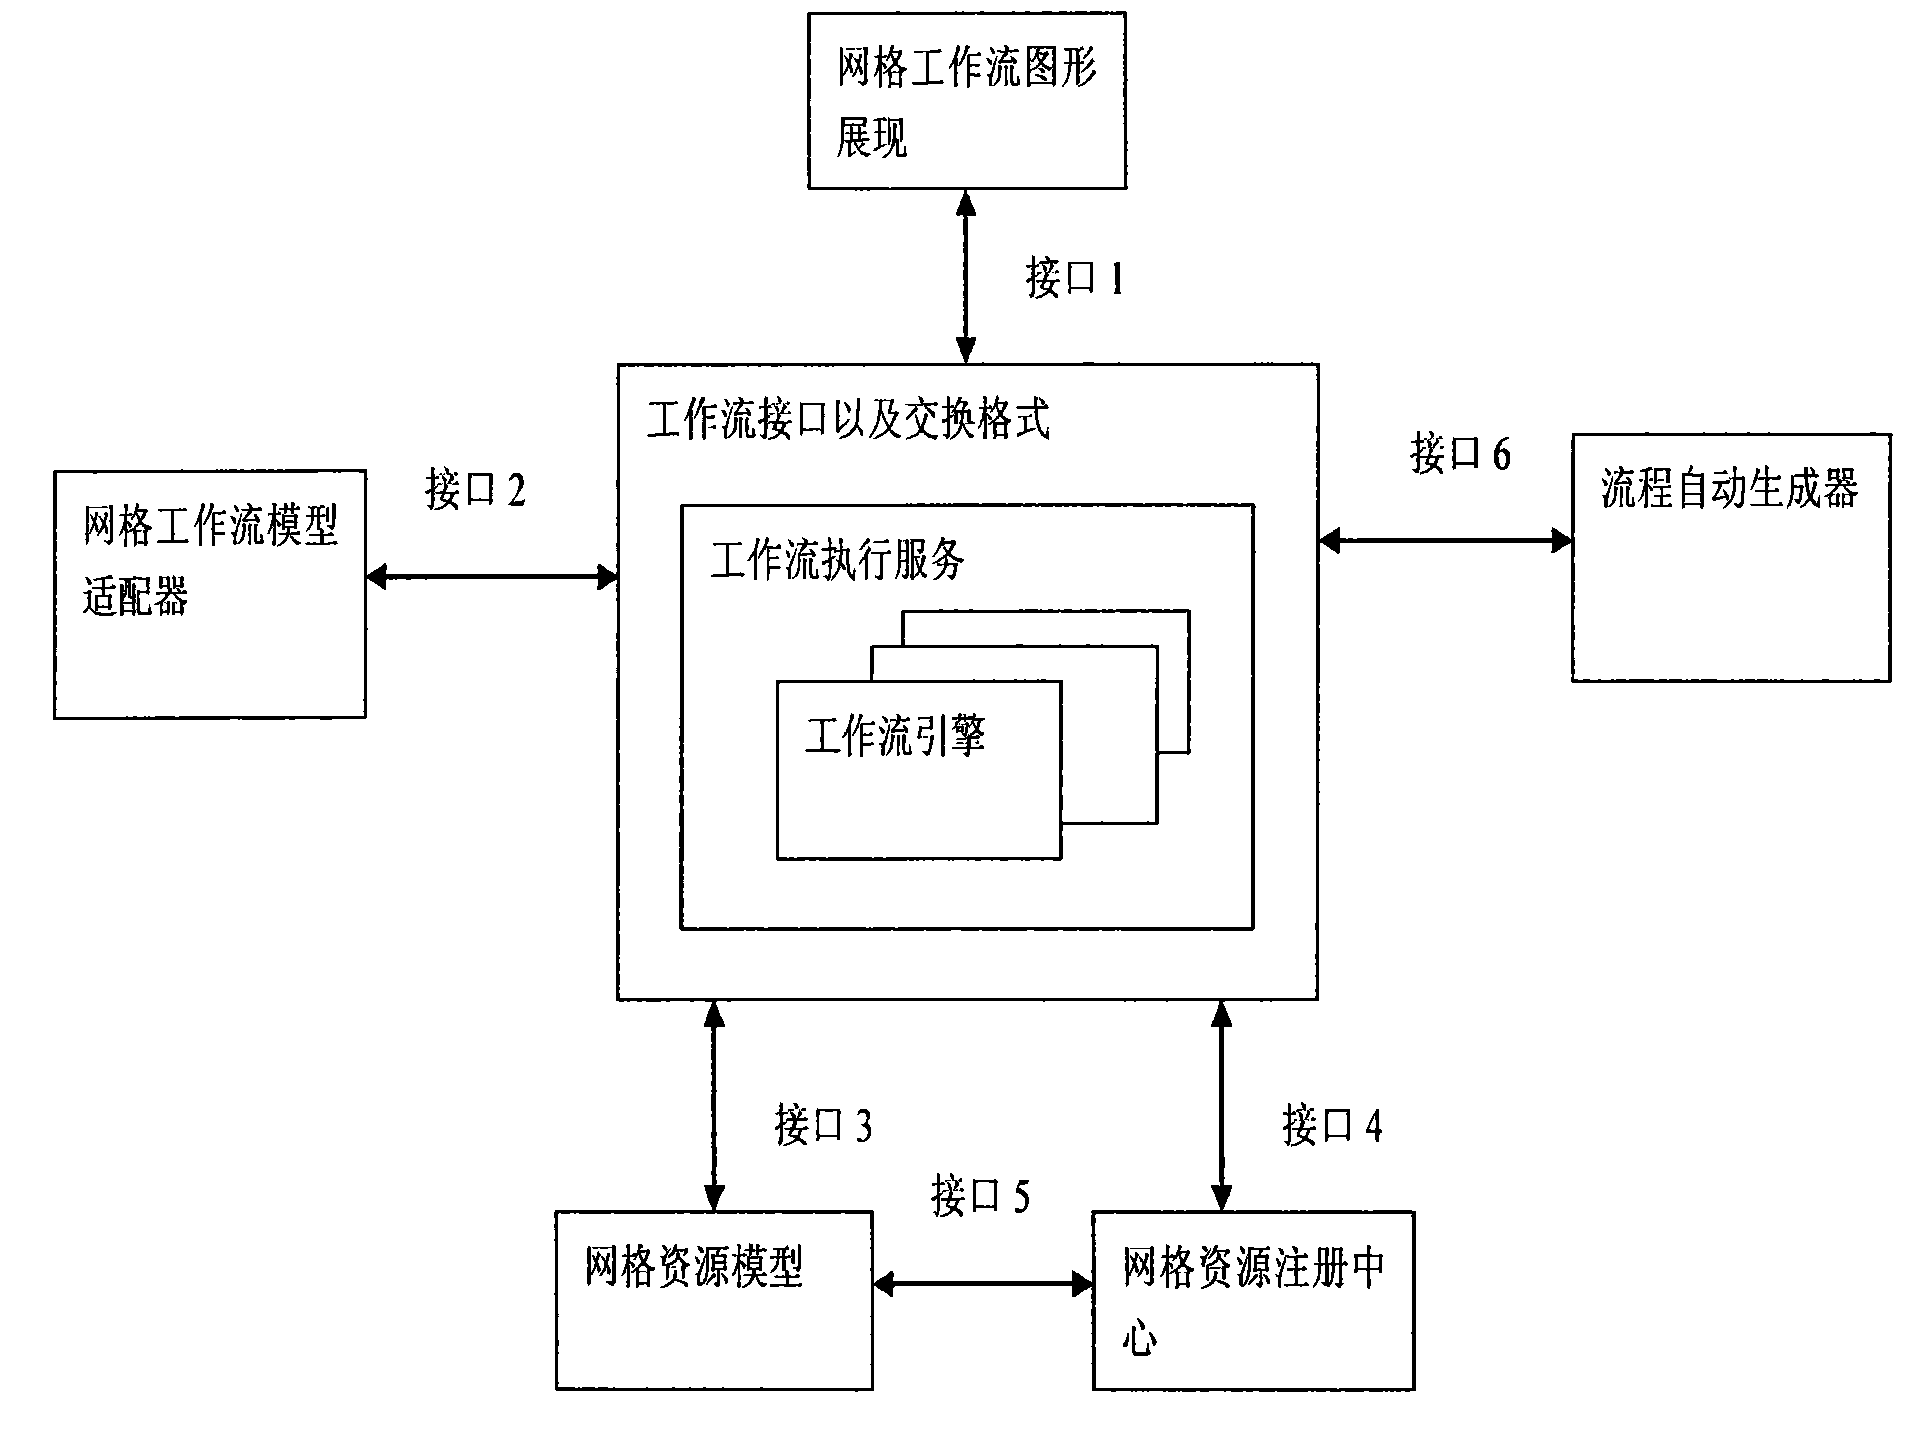 Graphical development method used for grid computing